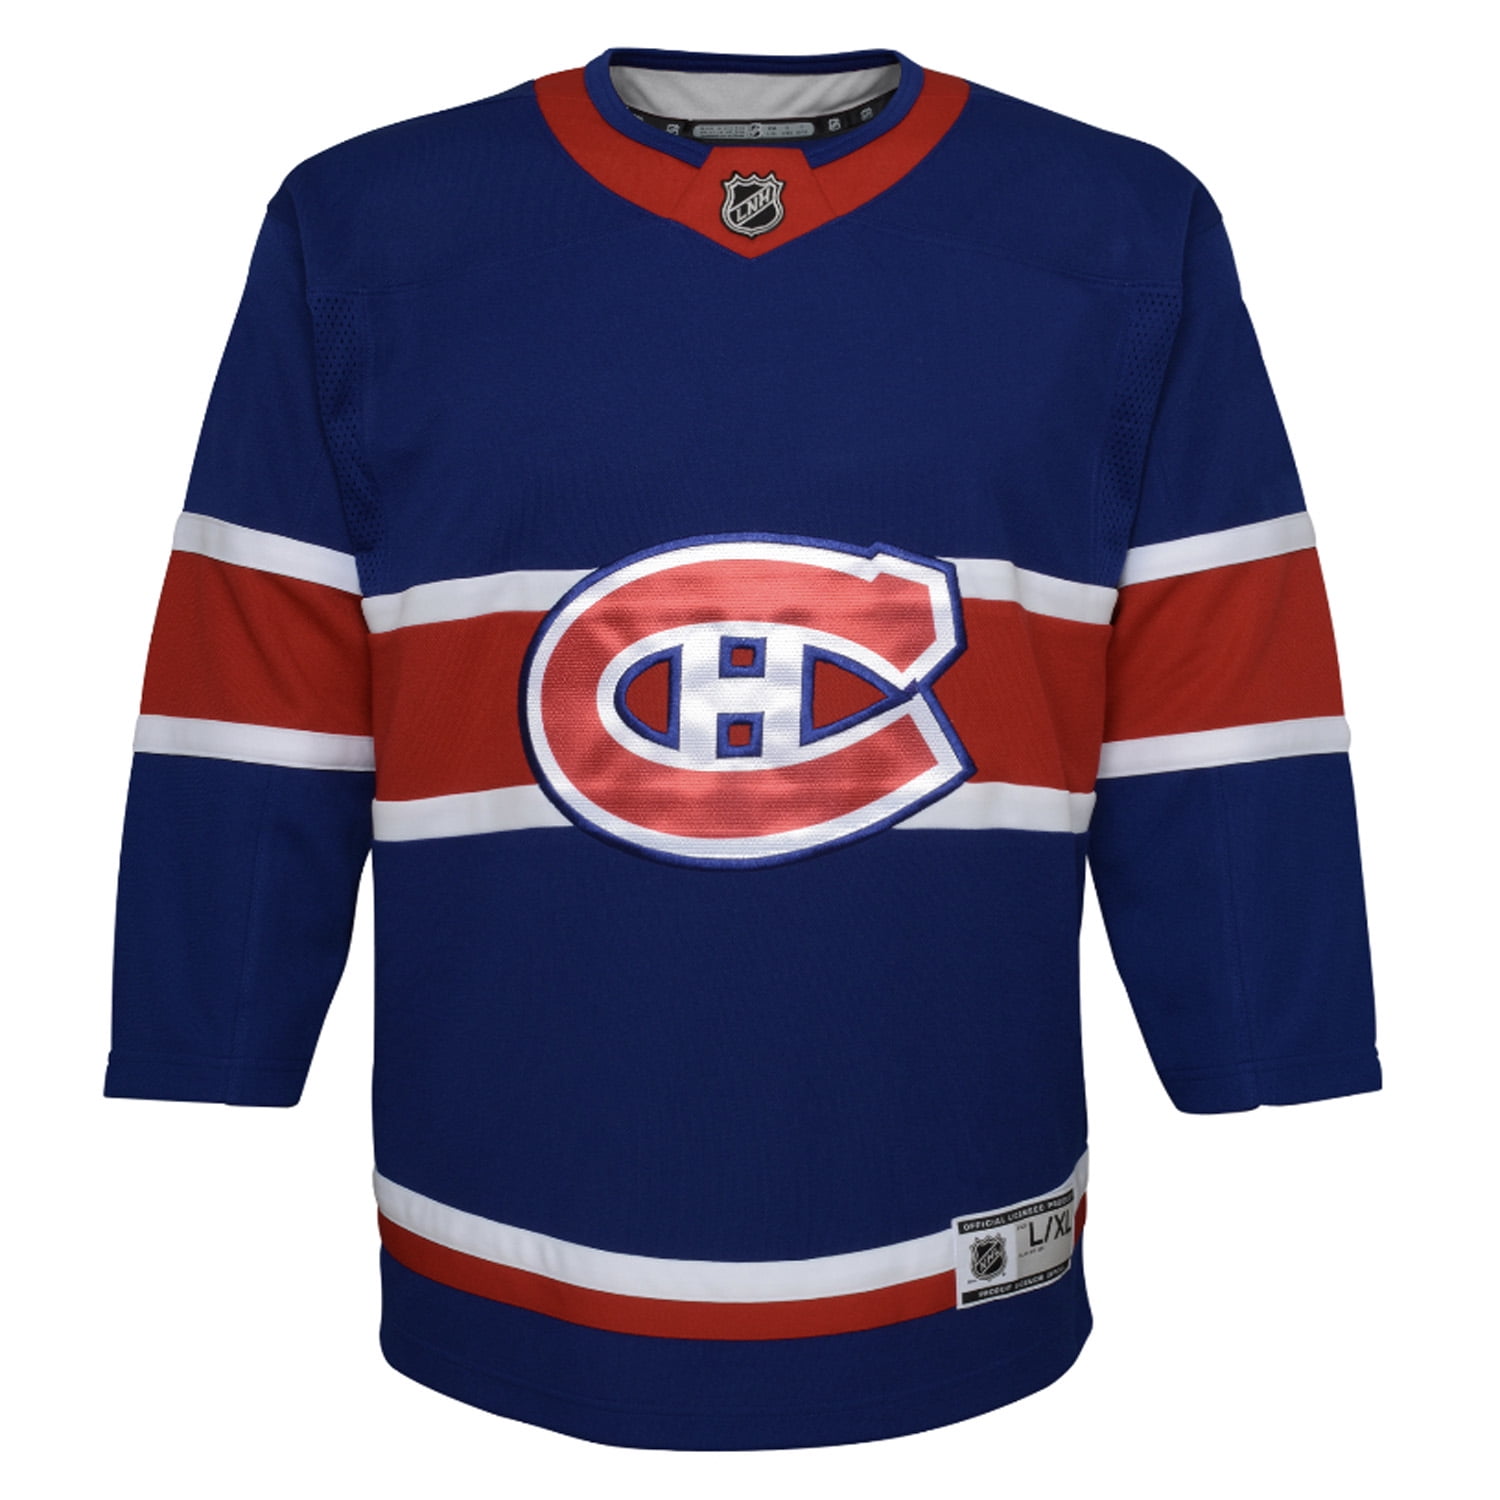 Lucas Daitchman on X: Here's what I'd like to see the Habs do with an  Expos-themed Reverse Retro jersey next season. It's an unmistakable  tribute, but one that doesn't deviate too far